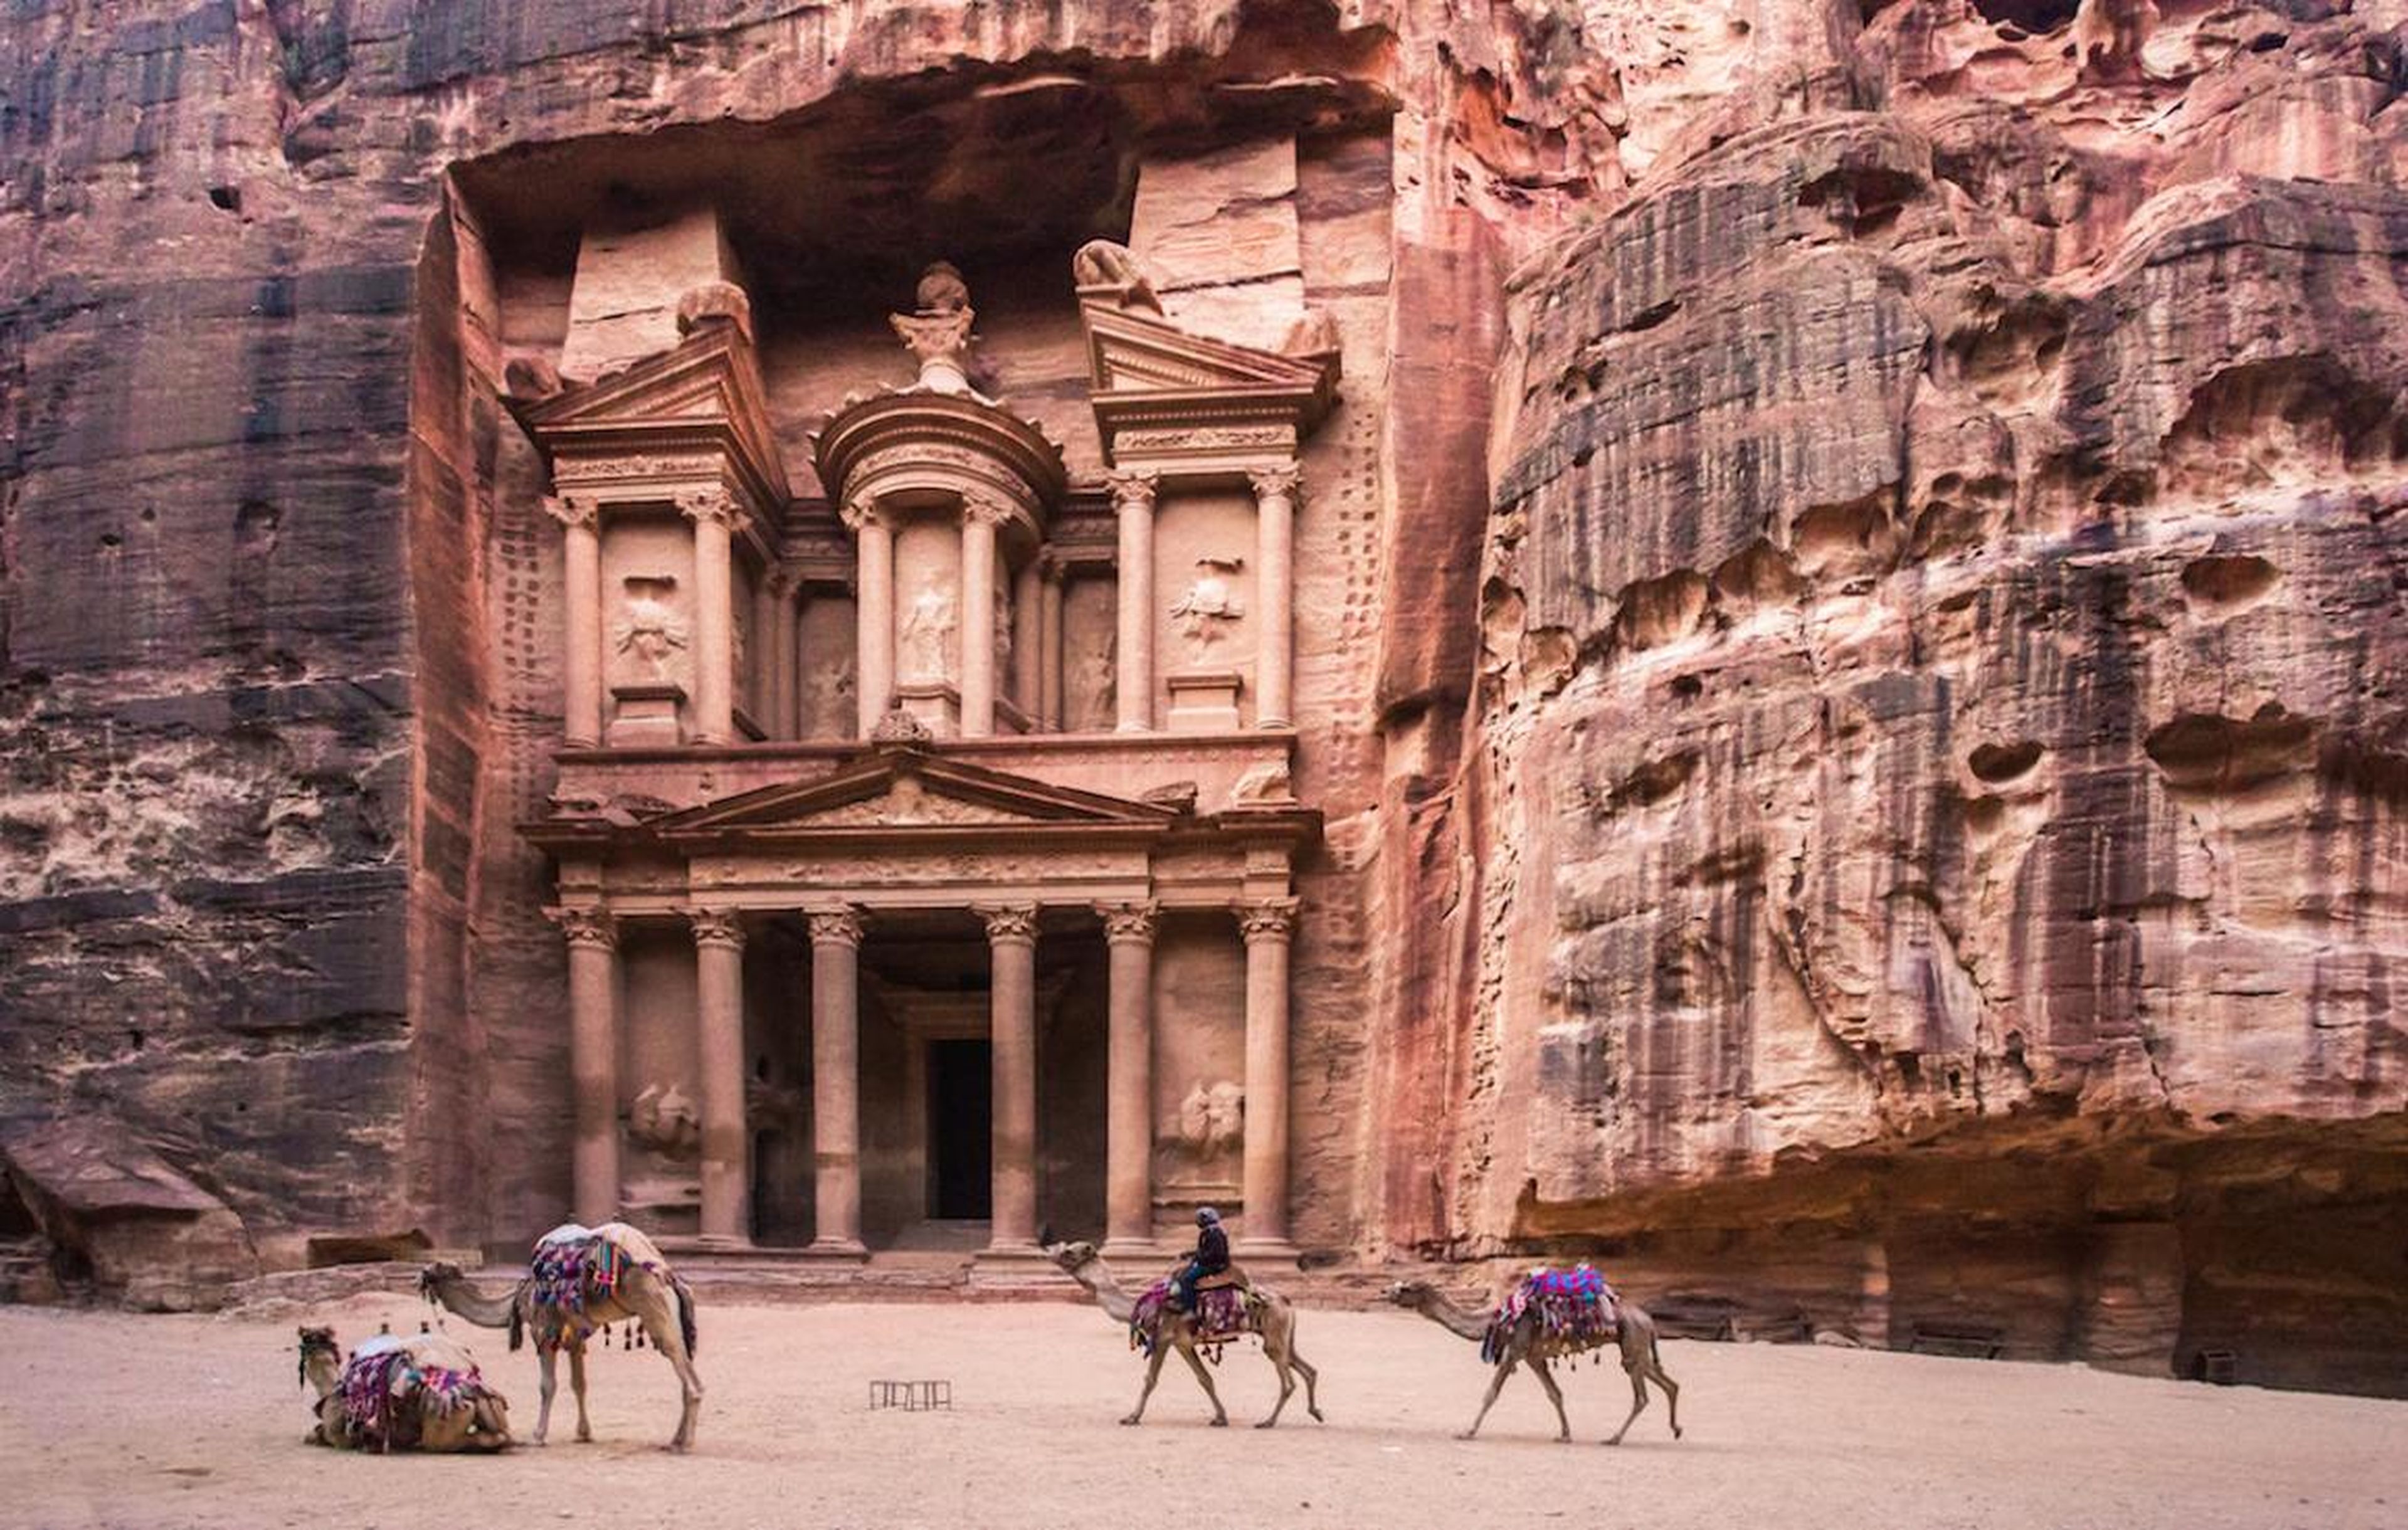 Petra is quite the sight.